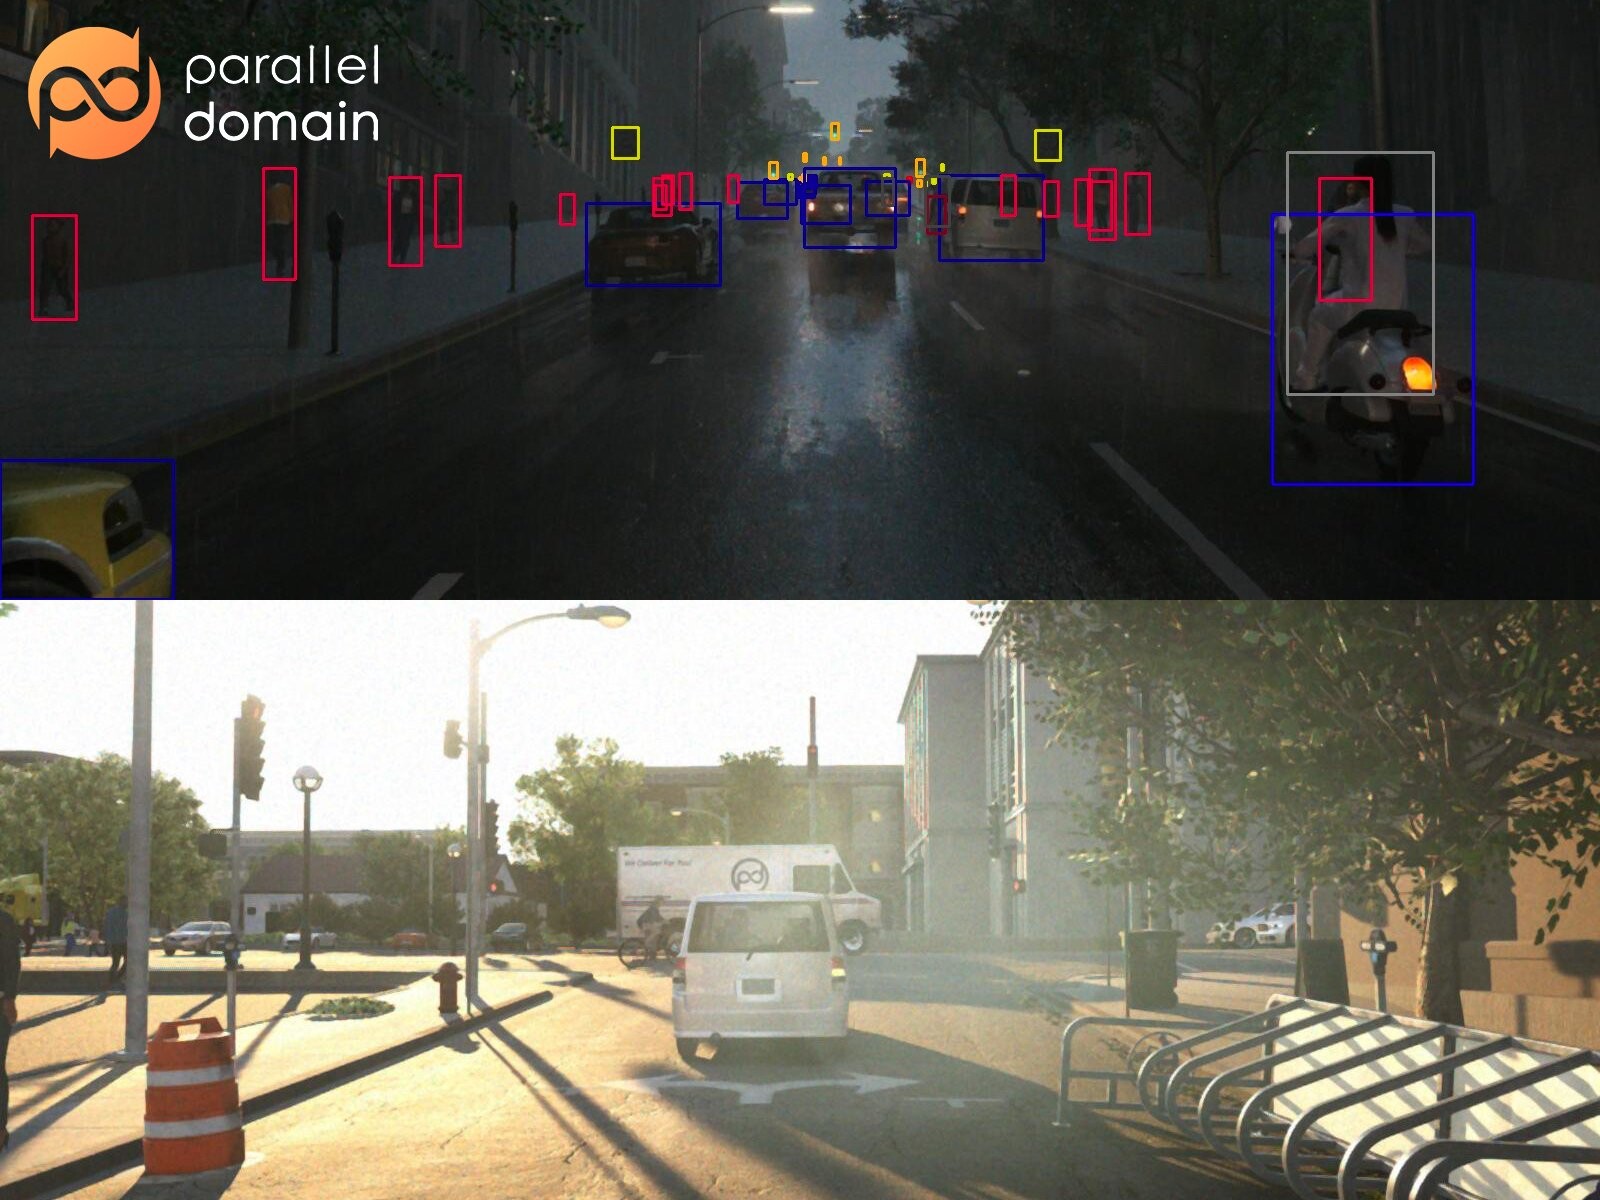 Examples of visuals simulating different lighting and weather conditions.